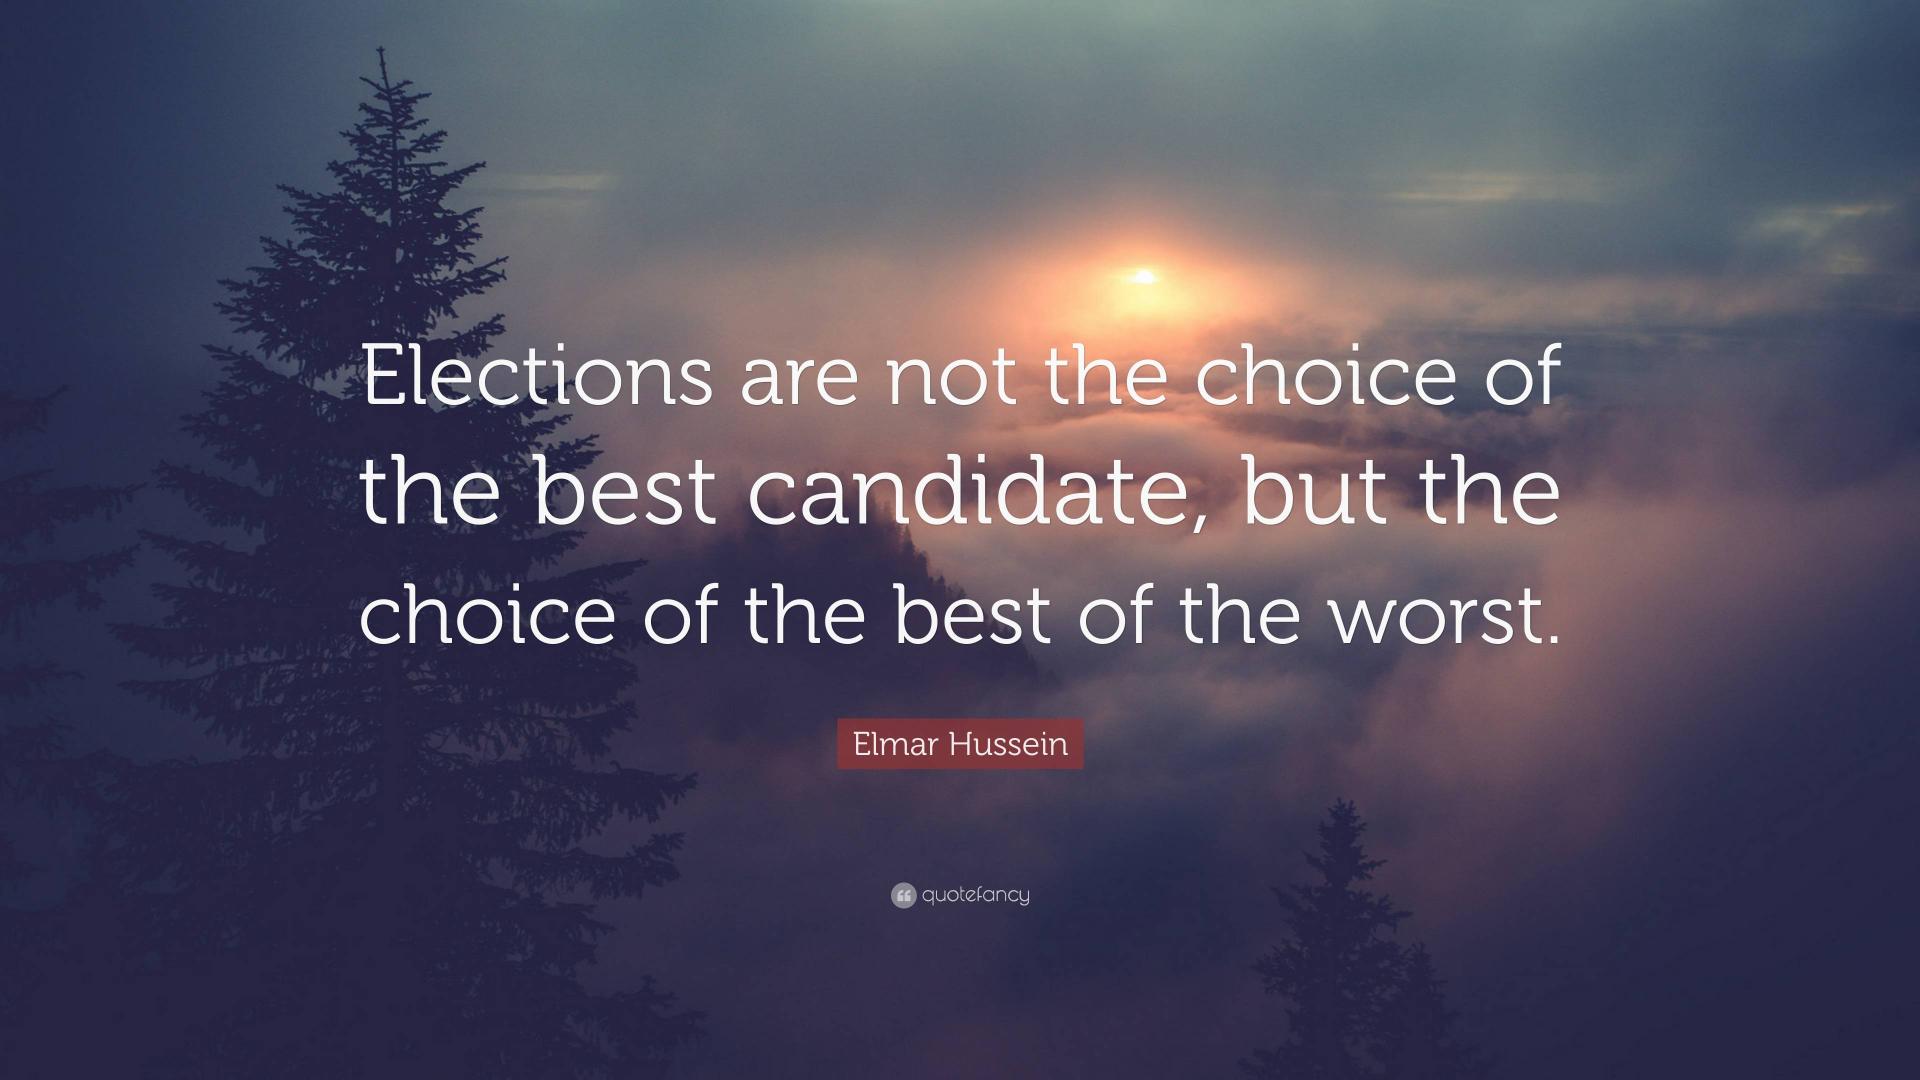 7550674 elmar hussein quote elections are not the choice of the best